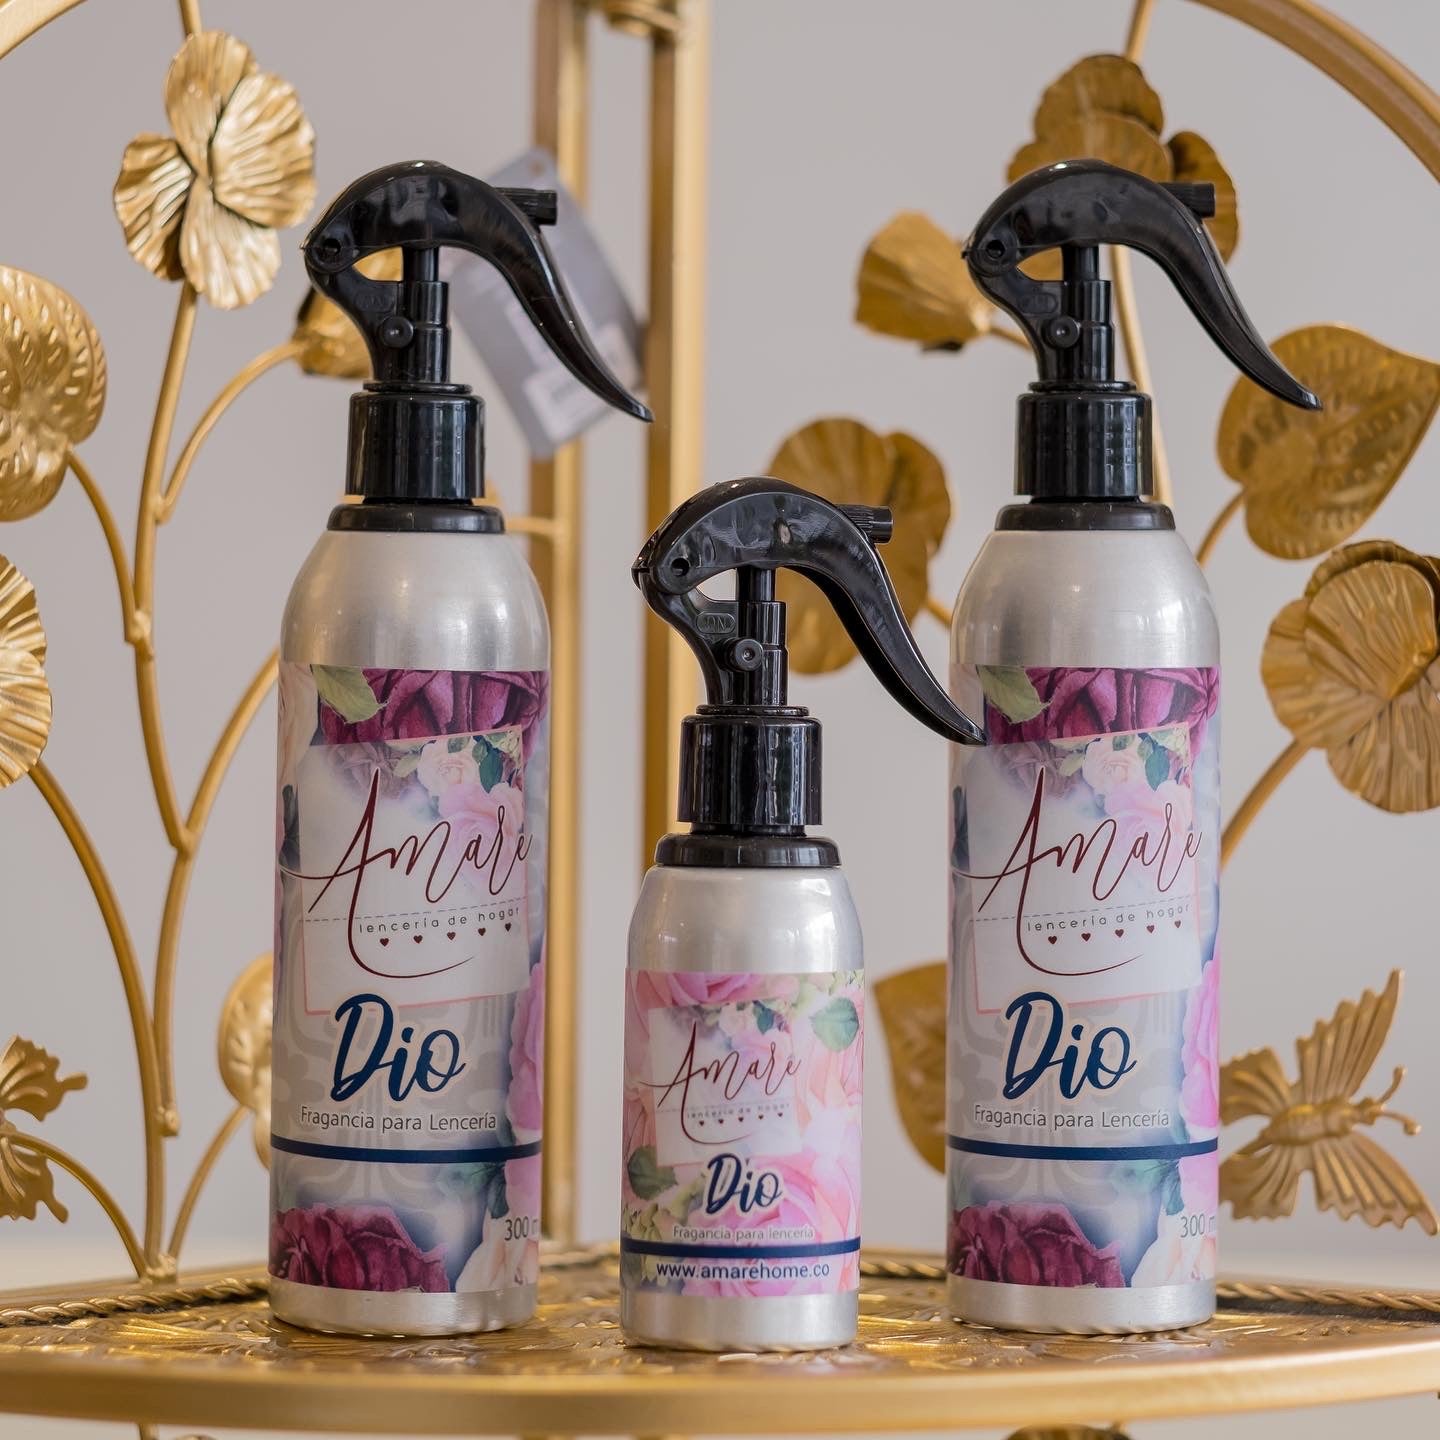 Home Fragrance Lingerie - Dio Collection